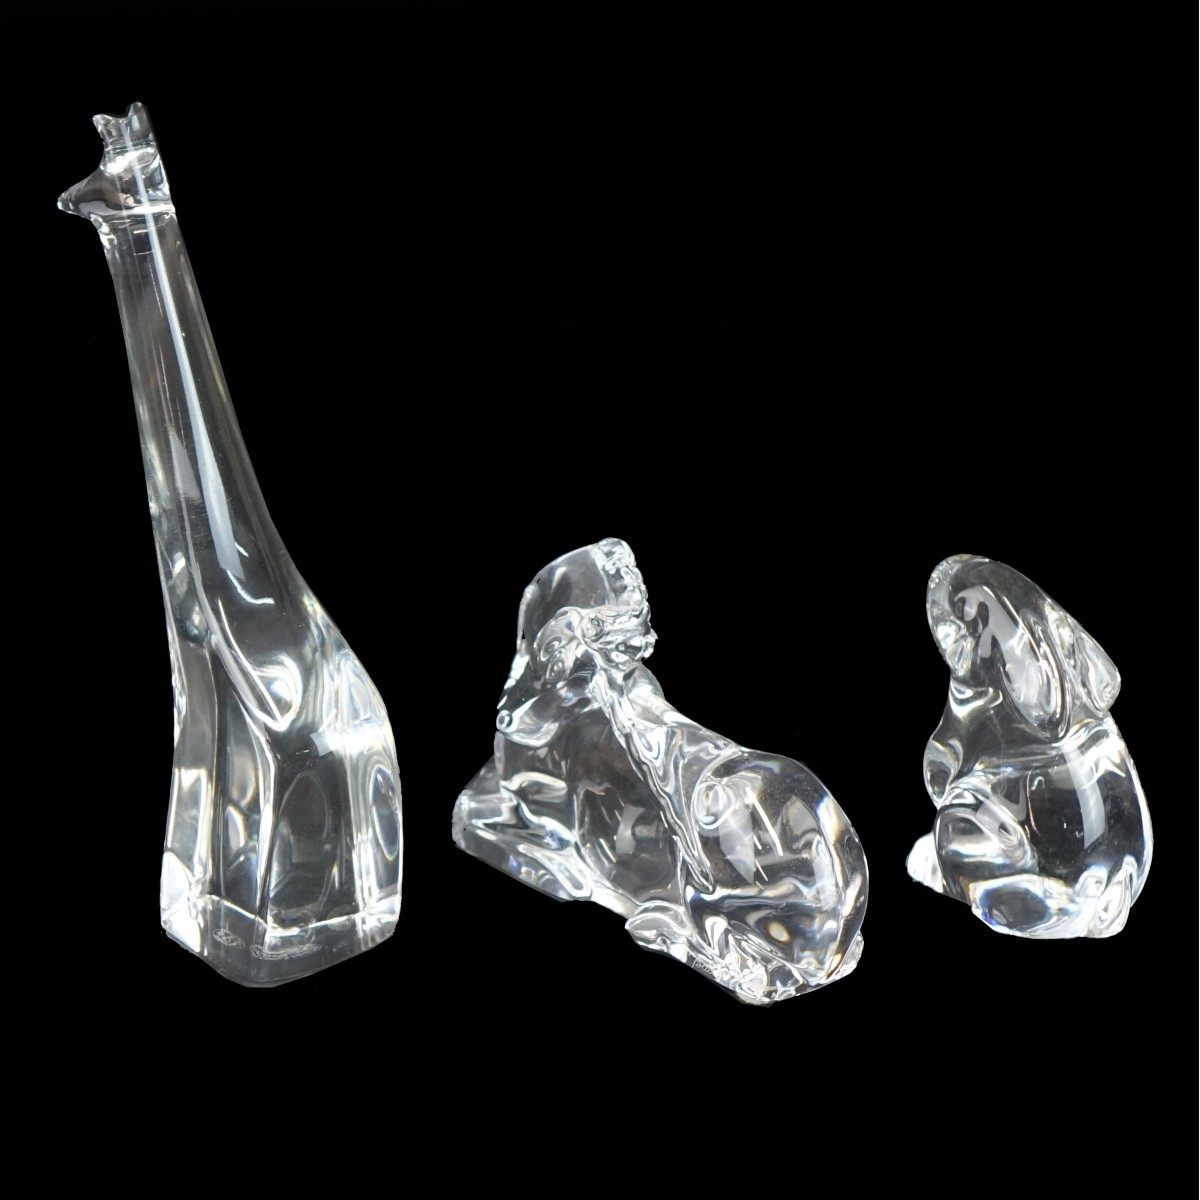 Baccarat Crystal Figurines | Kodner Auctions